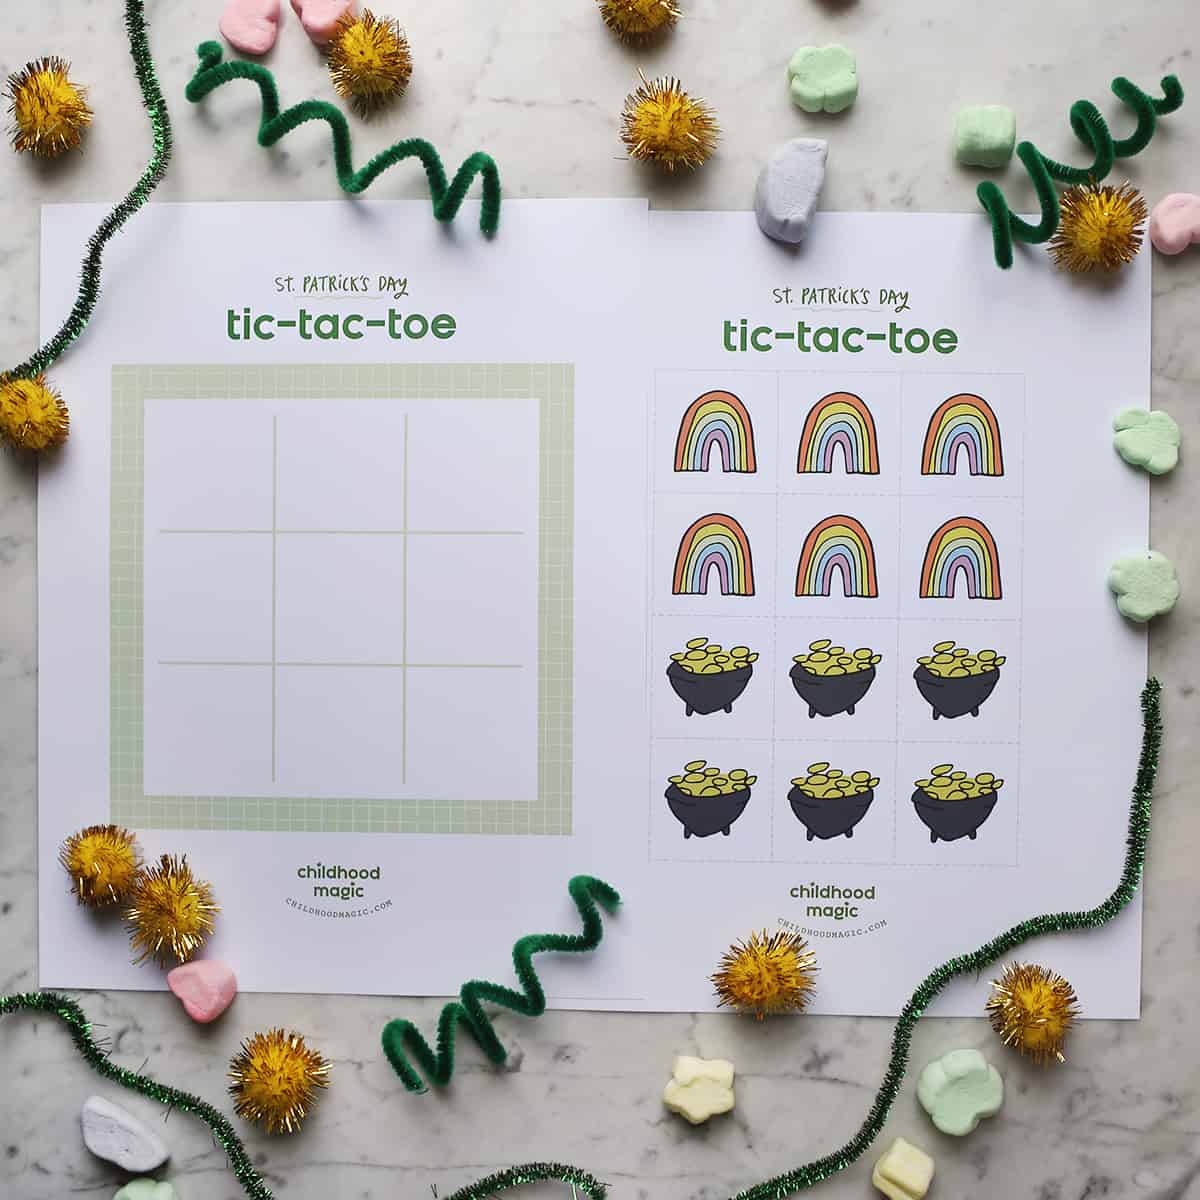 St. Patrick's Day printable tic tac toe board and tokens. 